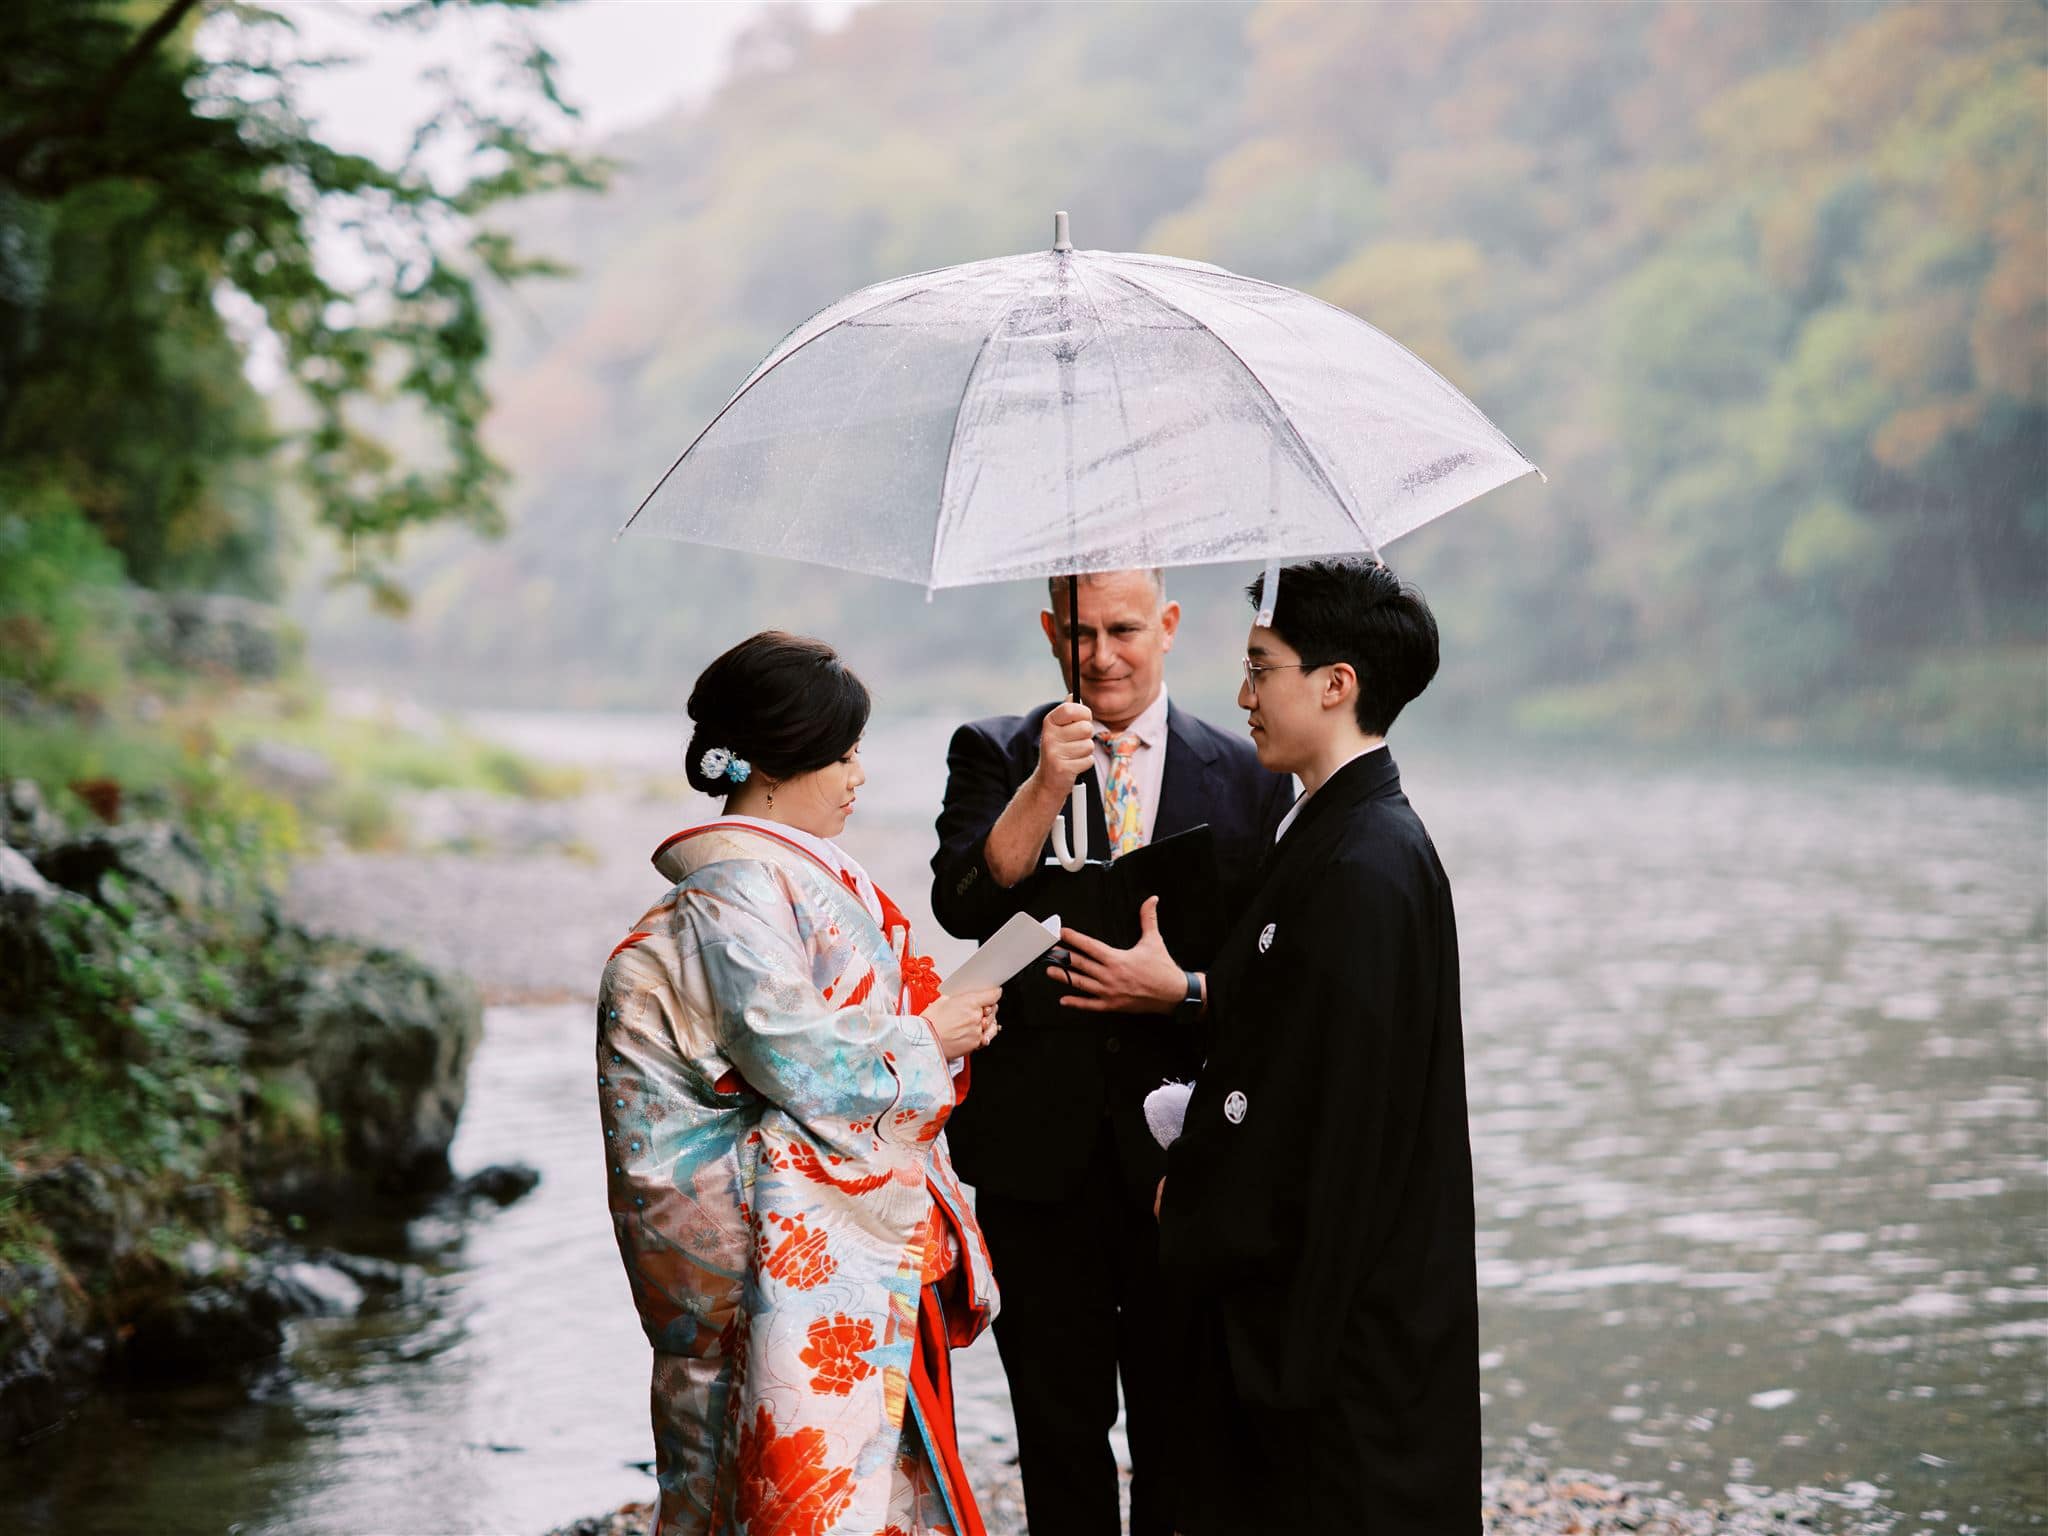 Japan Elopement Wedding Photographer, Planner & Videographer | A group of people standing by a river, planning their elopement.